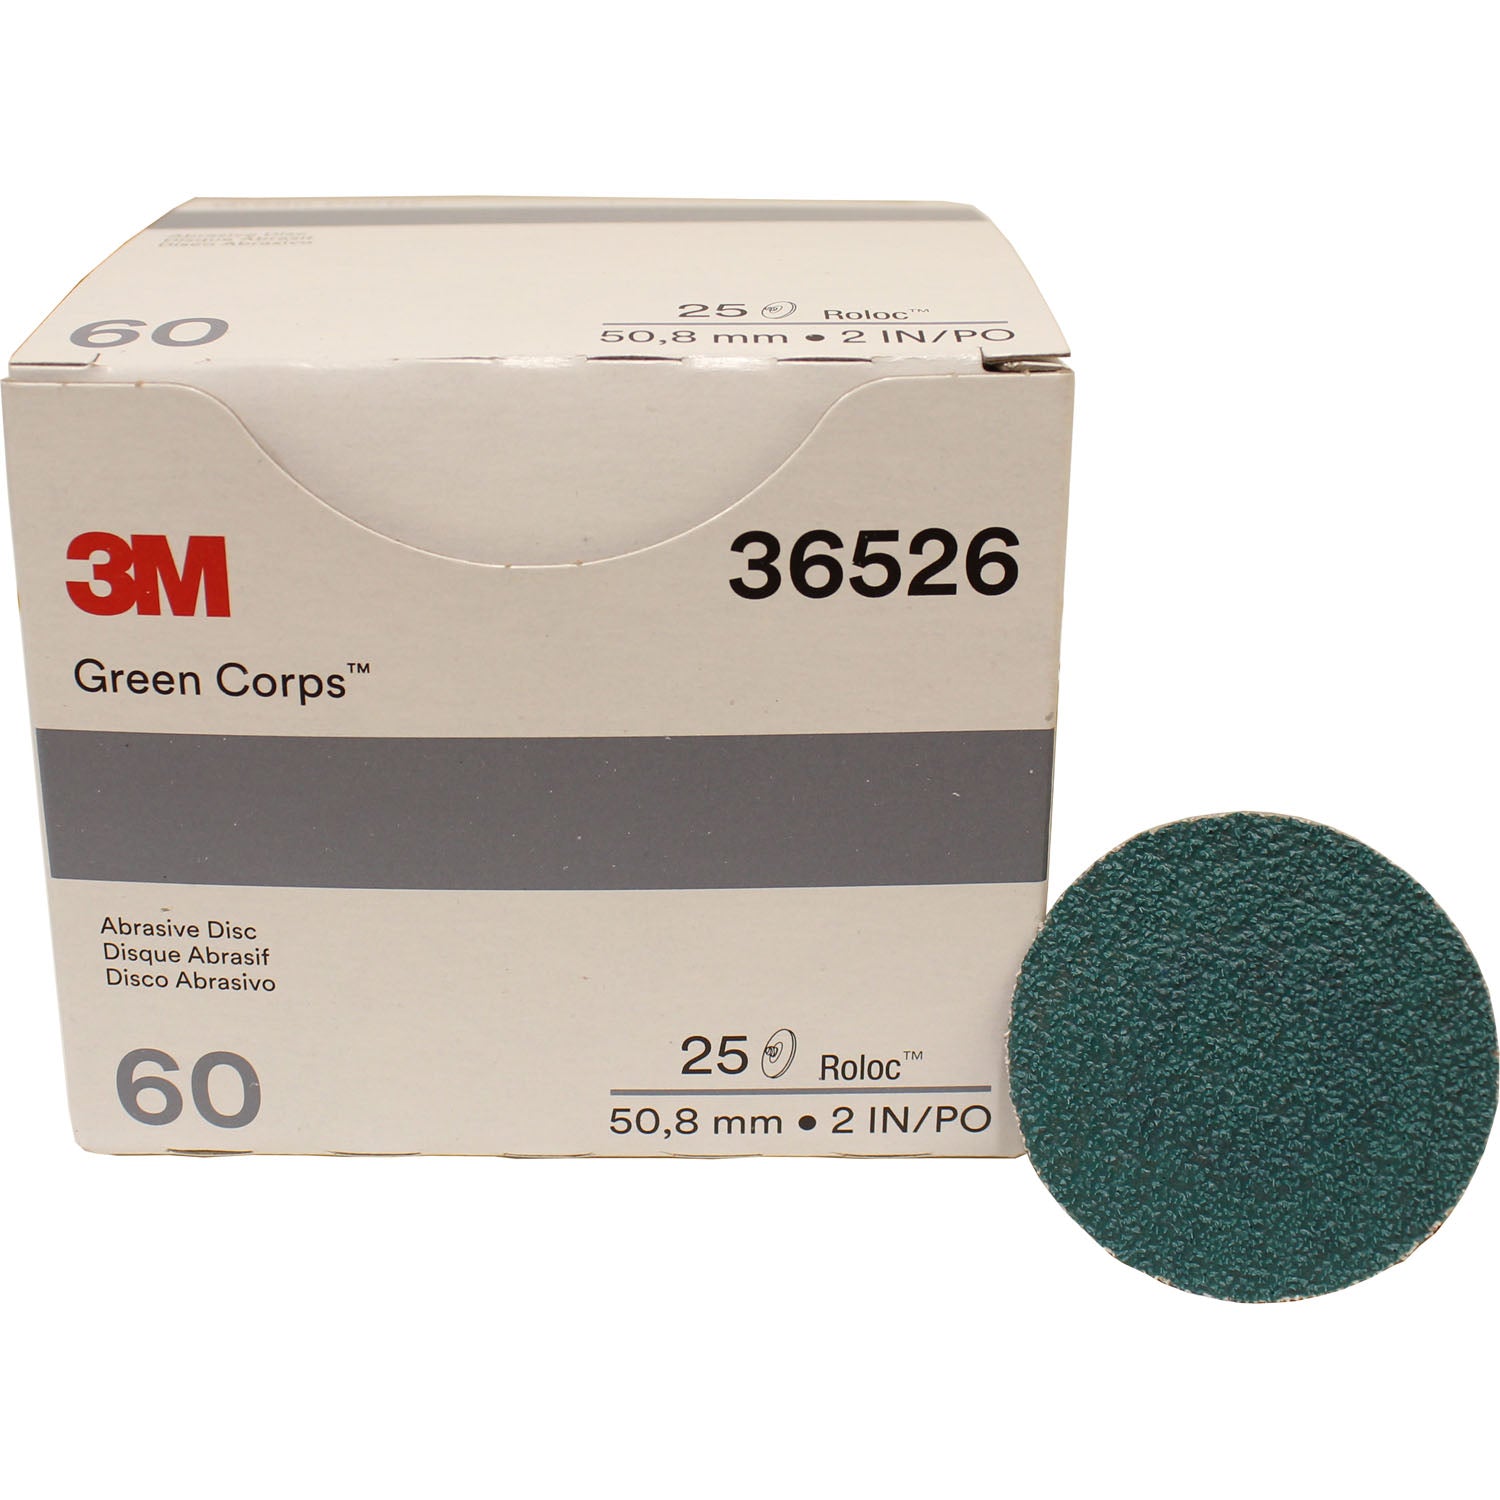 3M 36526 2" 60 Grit Roloc Green Corps Abrasive Disc - Box of 25